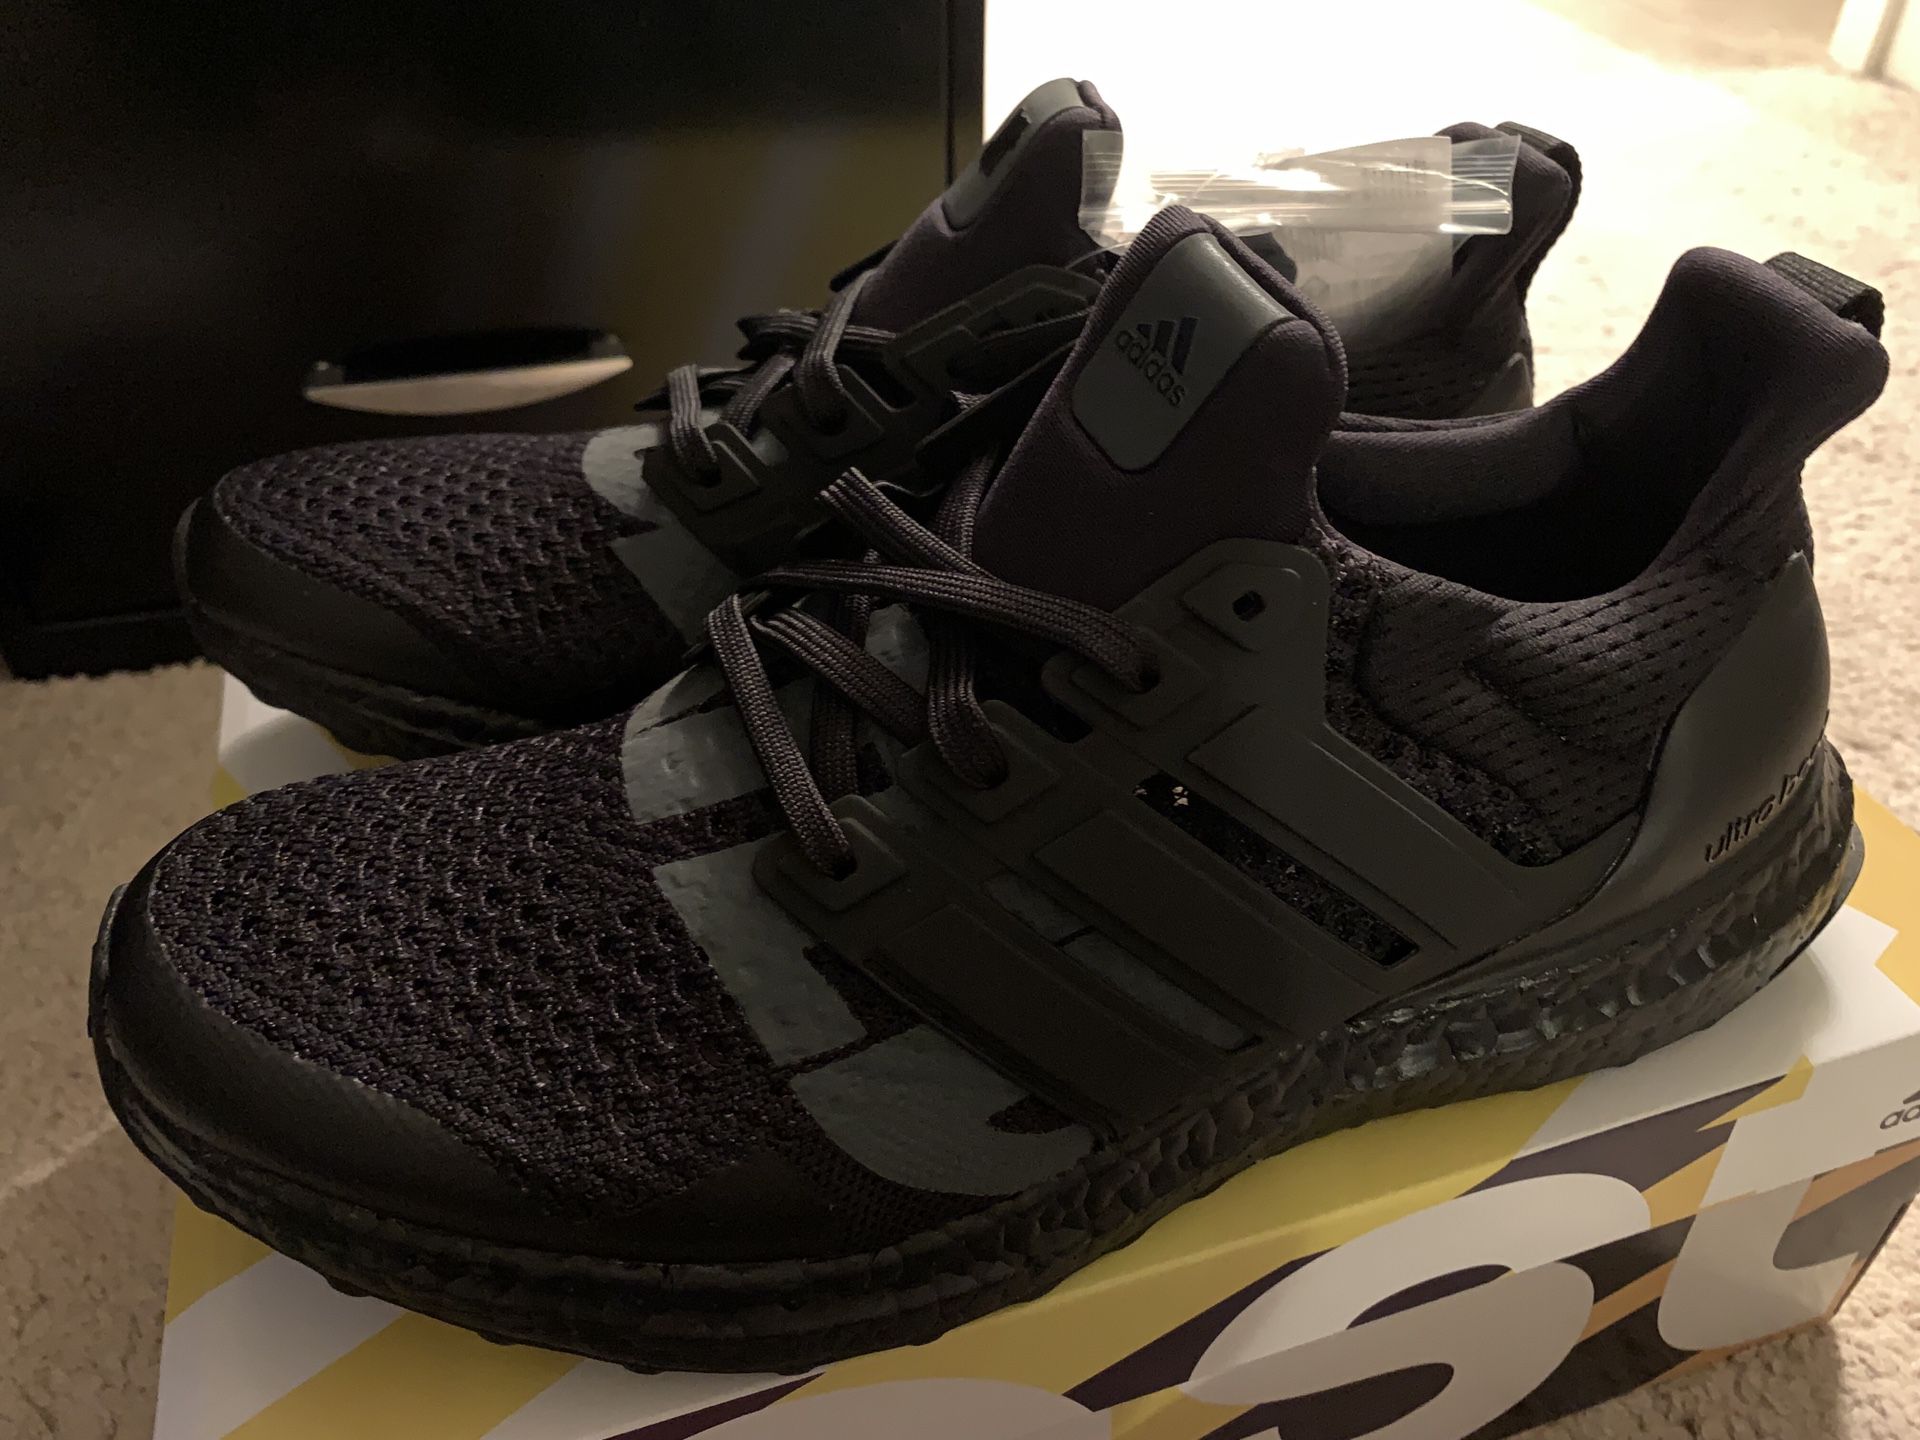 Adidas x Undefeated Ultraboost Blackout